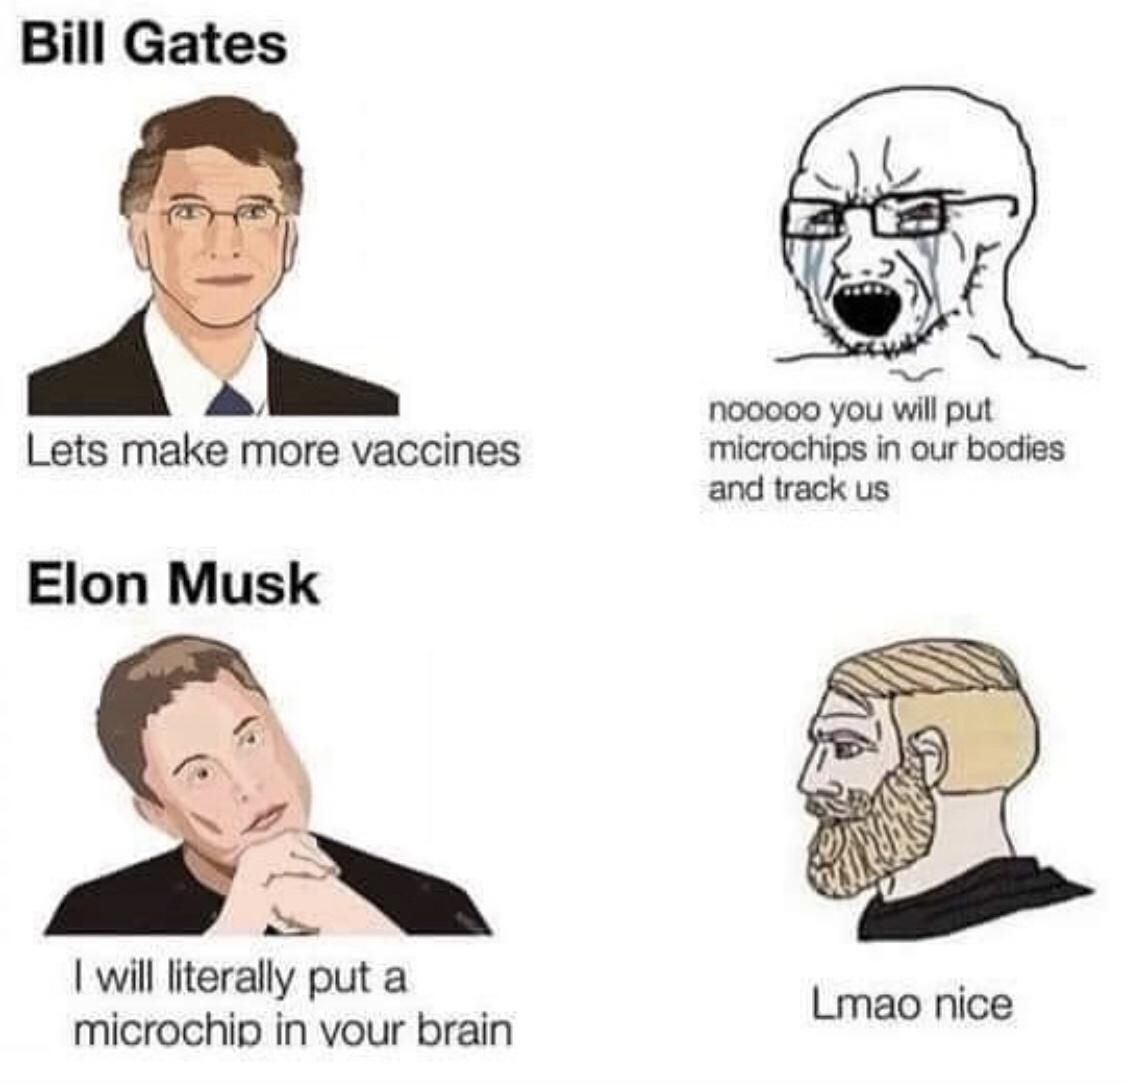 bill gates elon musk meme - Bill Gates Lets make more vaccines nooooo you will put microchips in our bodies and track us Elon Musk I will literally put a microchip in your brain Lmao nice